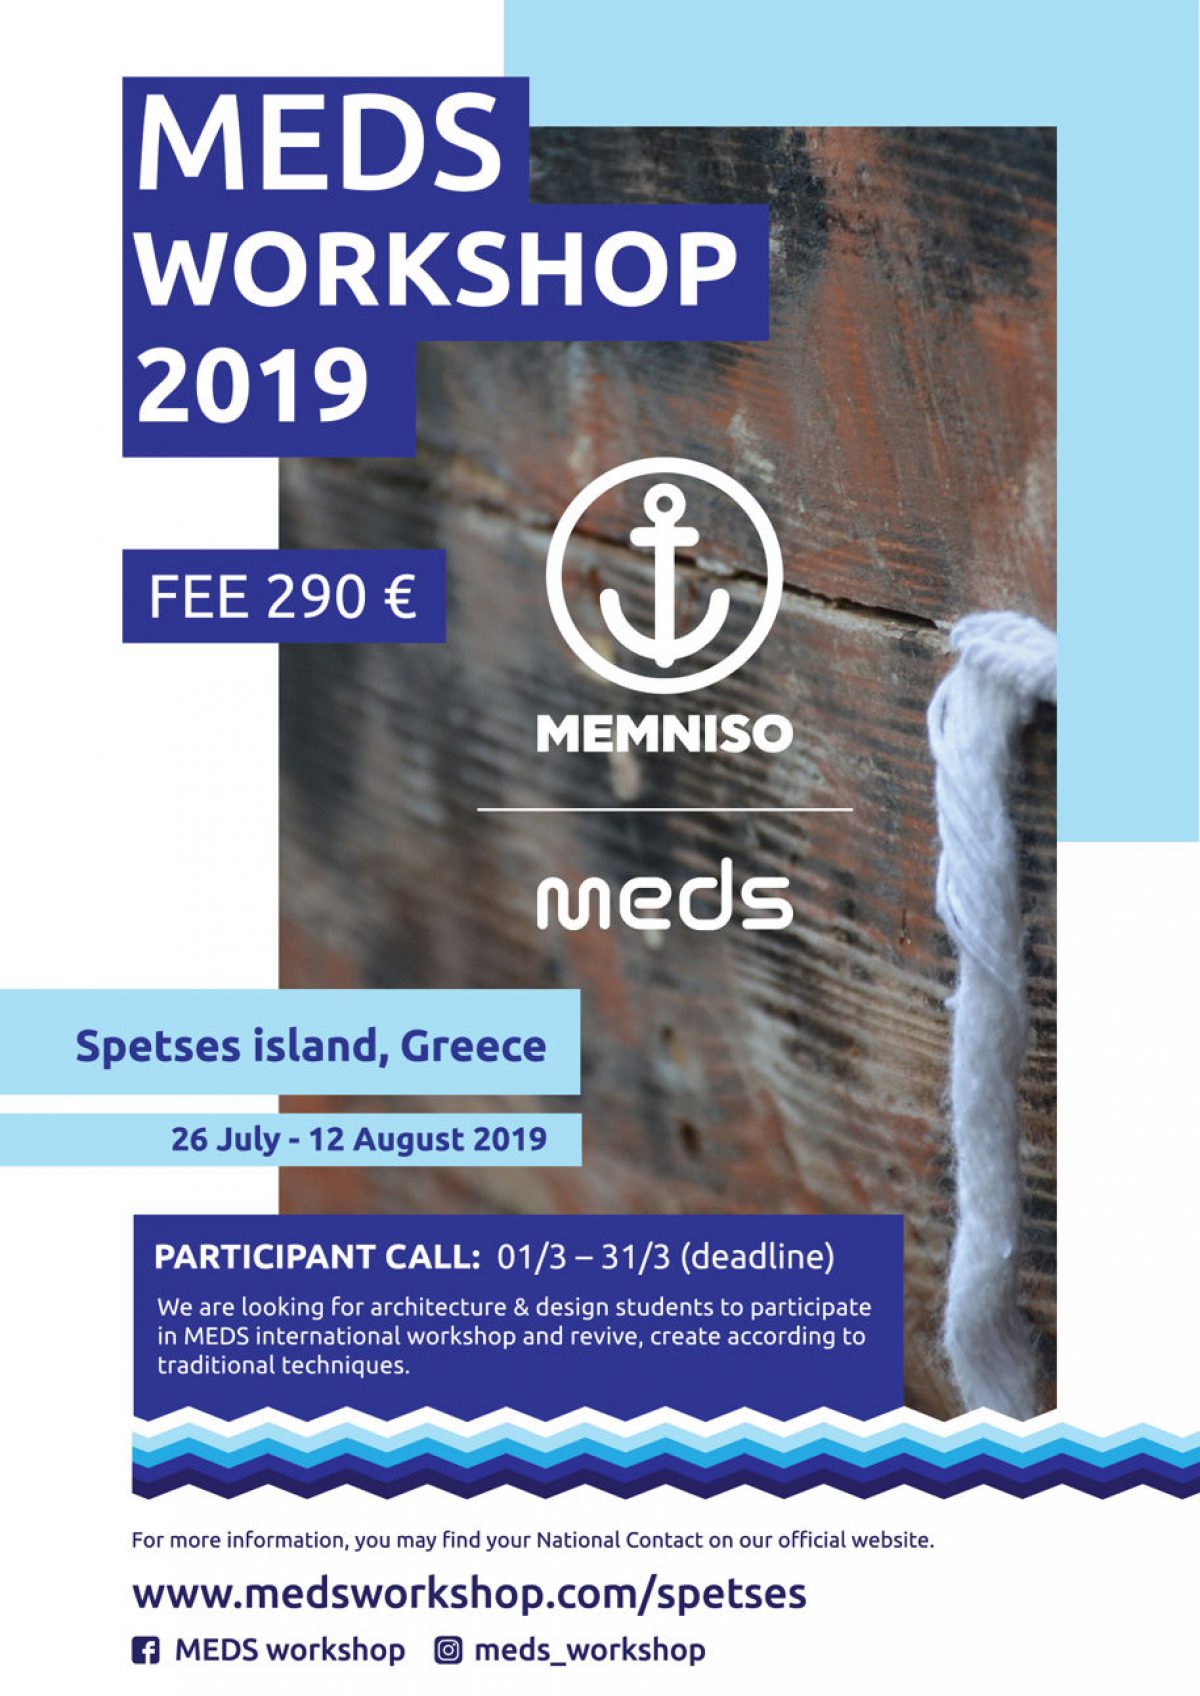 MEDS Spetses 2019, 26 Ιουλίου έως 12 Αυγούστου Participant Call: 1/03/2019 – 5/04/2019.